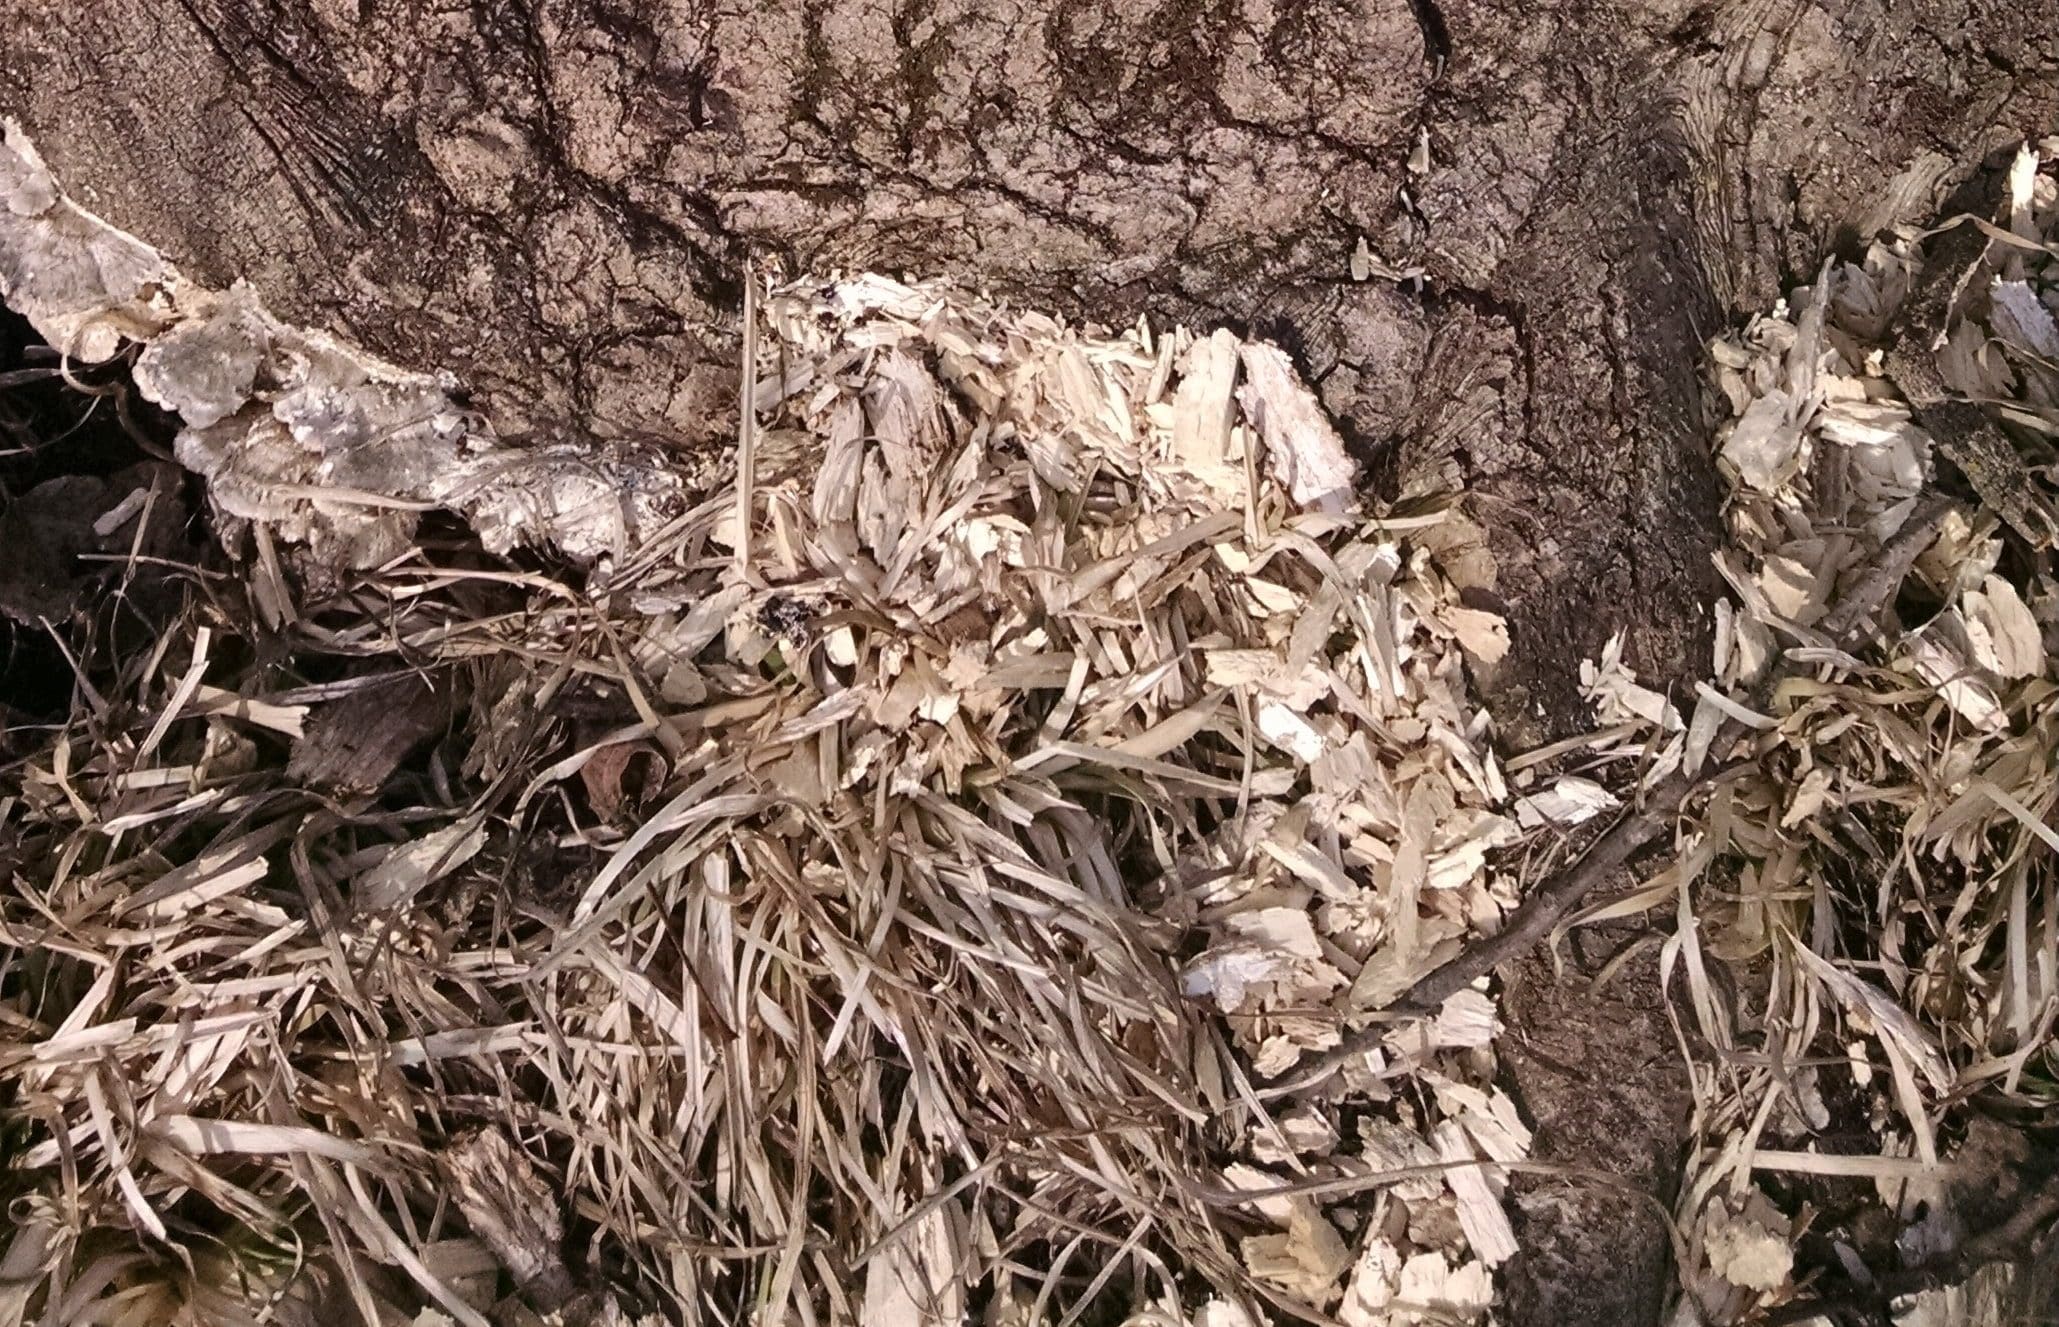 These birds are pretty efficient at removing material.  Note the wood chips at the base of the tree.  They break out big chips, roughly the same size as those that come out of a commercial wood chipper.